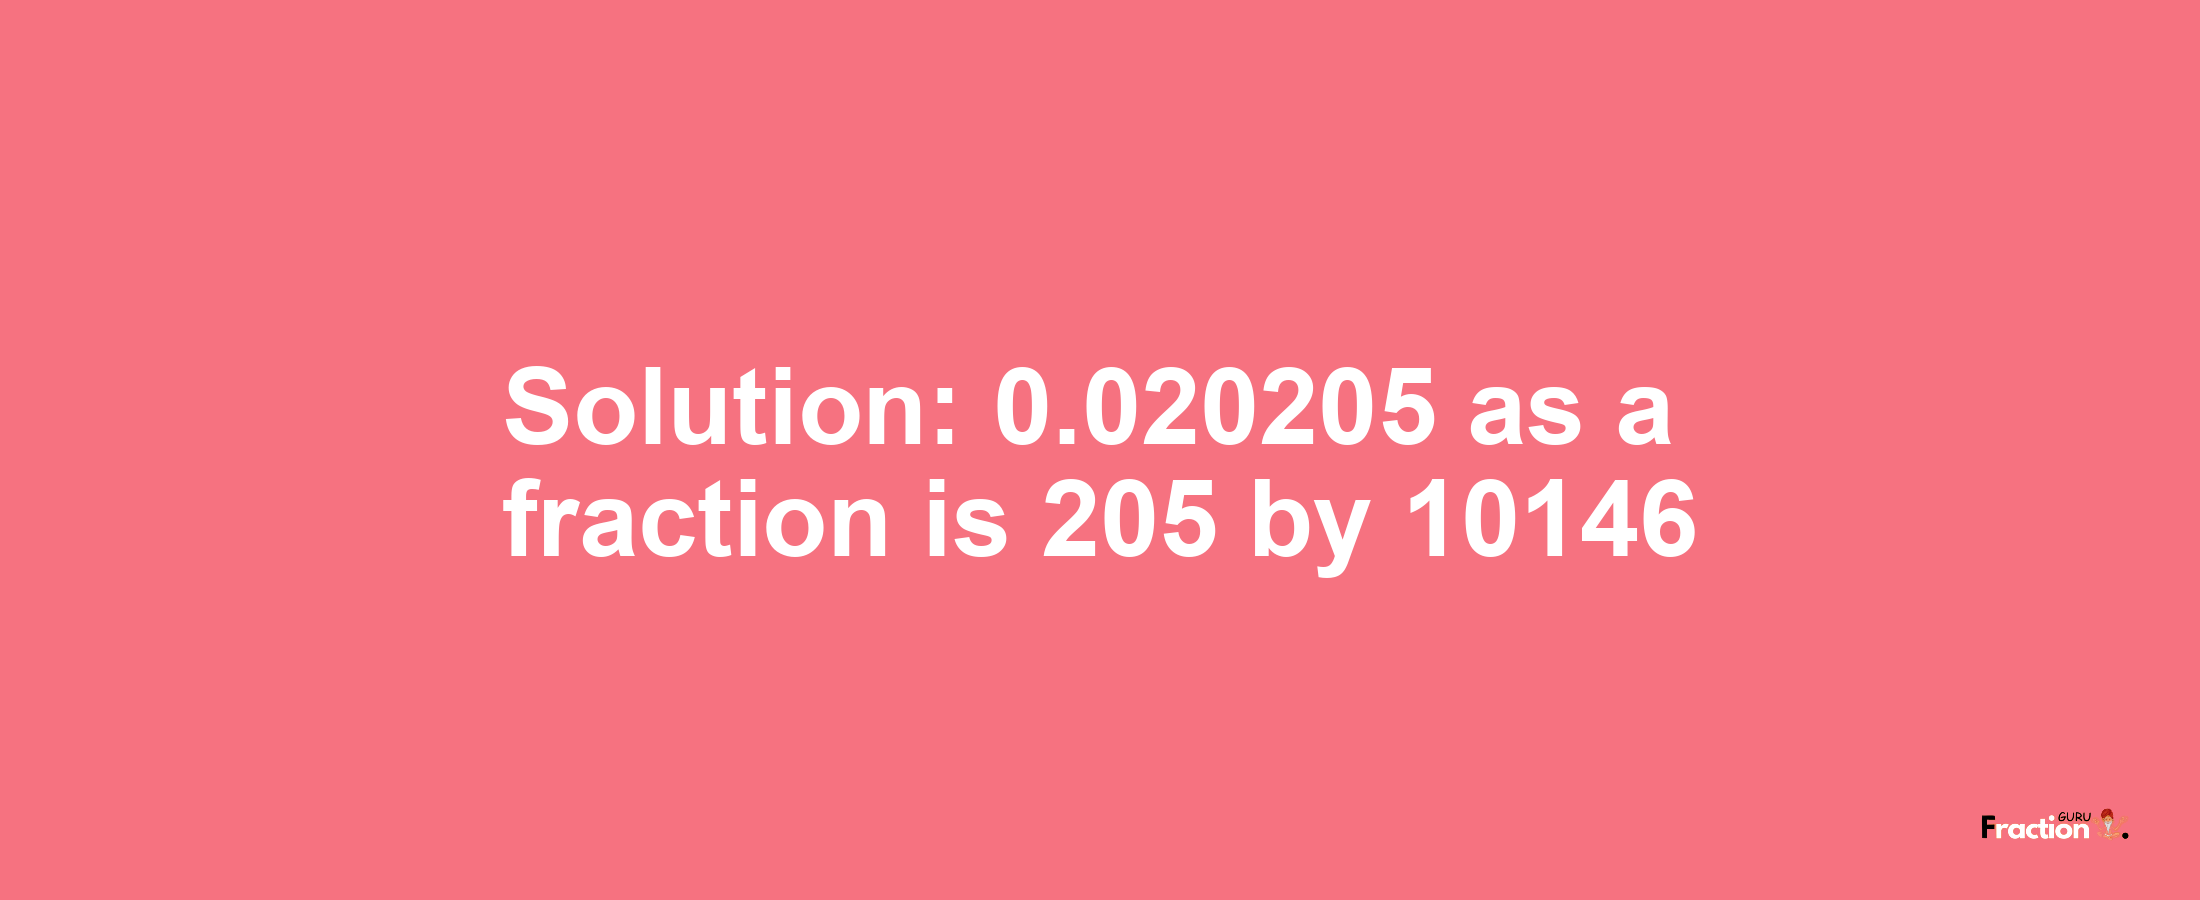 Solution:0.020205 as a fraction is 205/10146